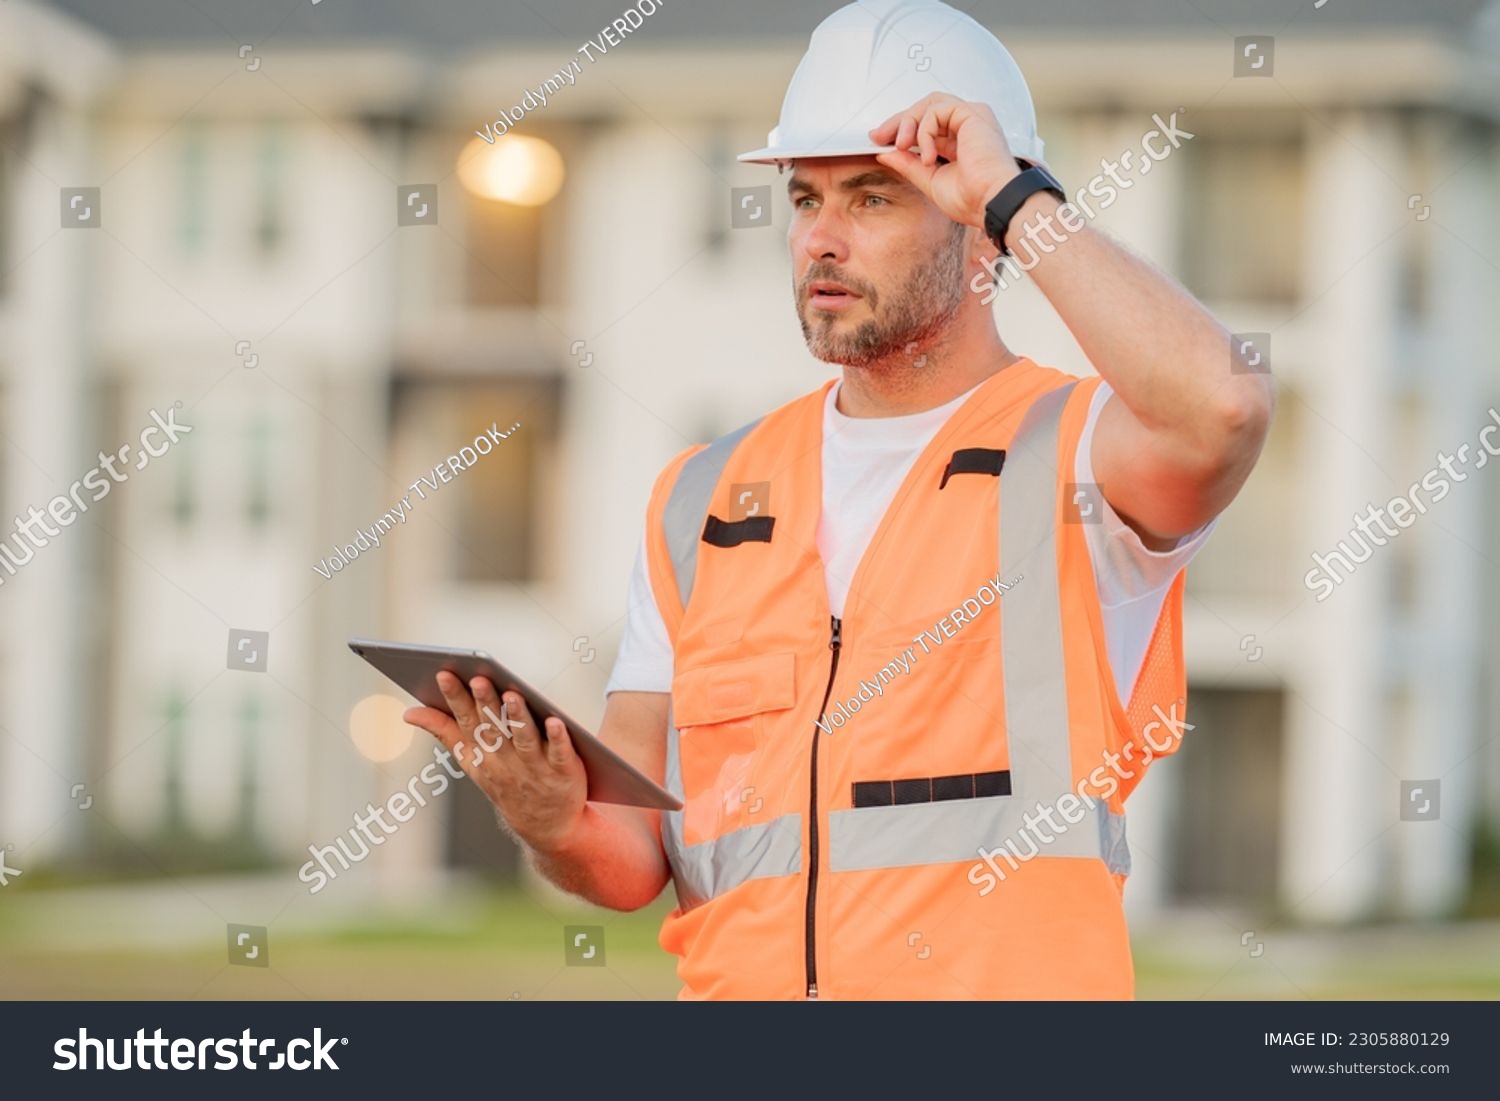 Engineer with tablet, building inspection. Builder at construction site. Buider with helmet on construction outdoor. Worker at construction site. Bilder in hardhat. #2305880129